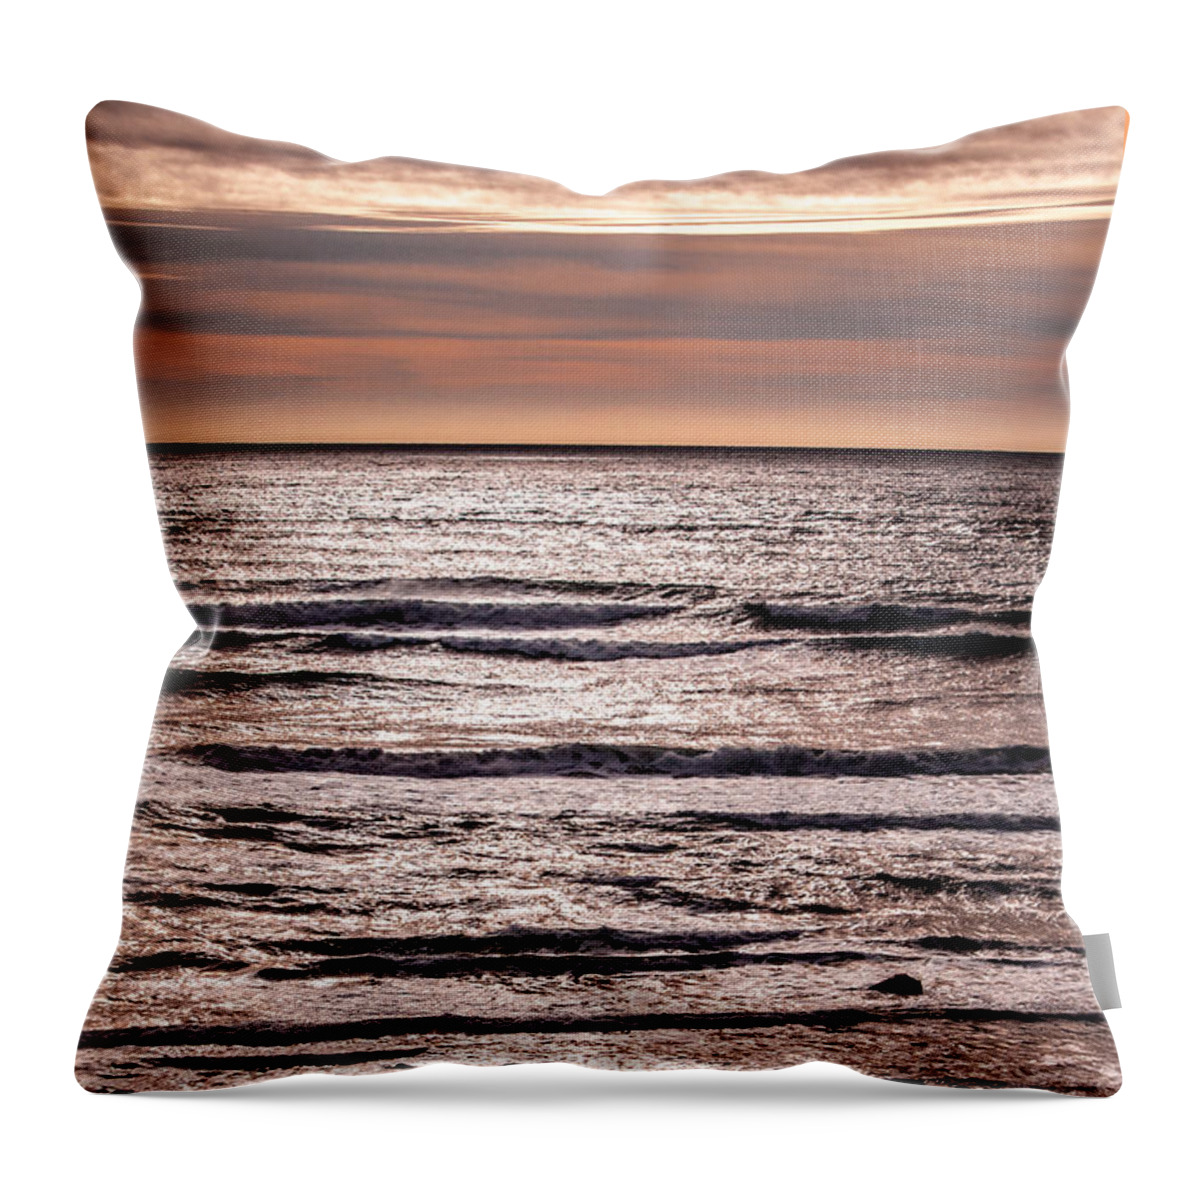 Sunset Throw Pillow featuring the photograph Sunset Ocean by Roxy Hurtubise